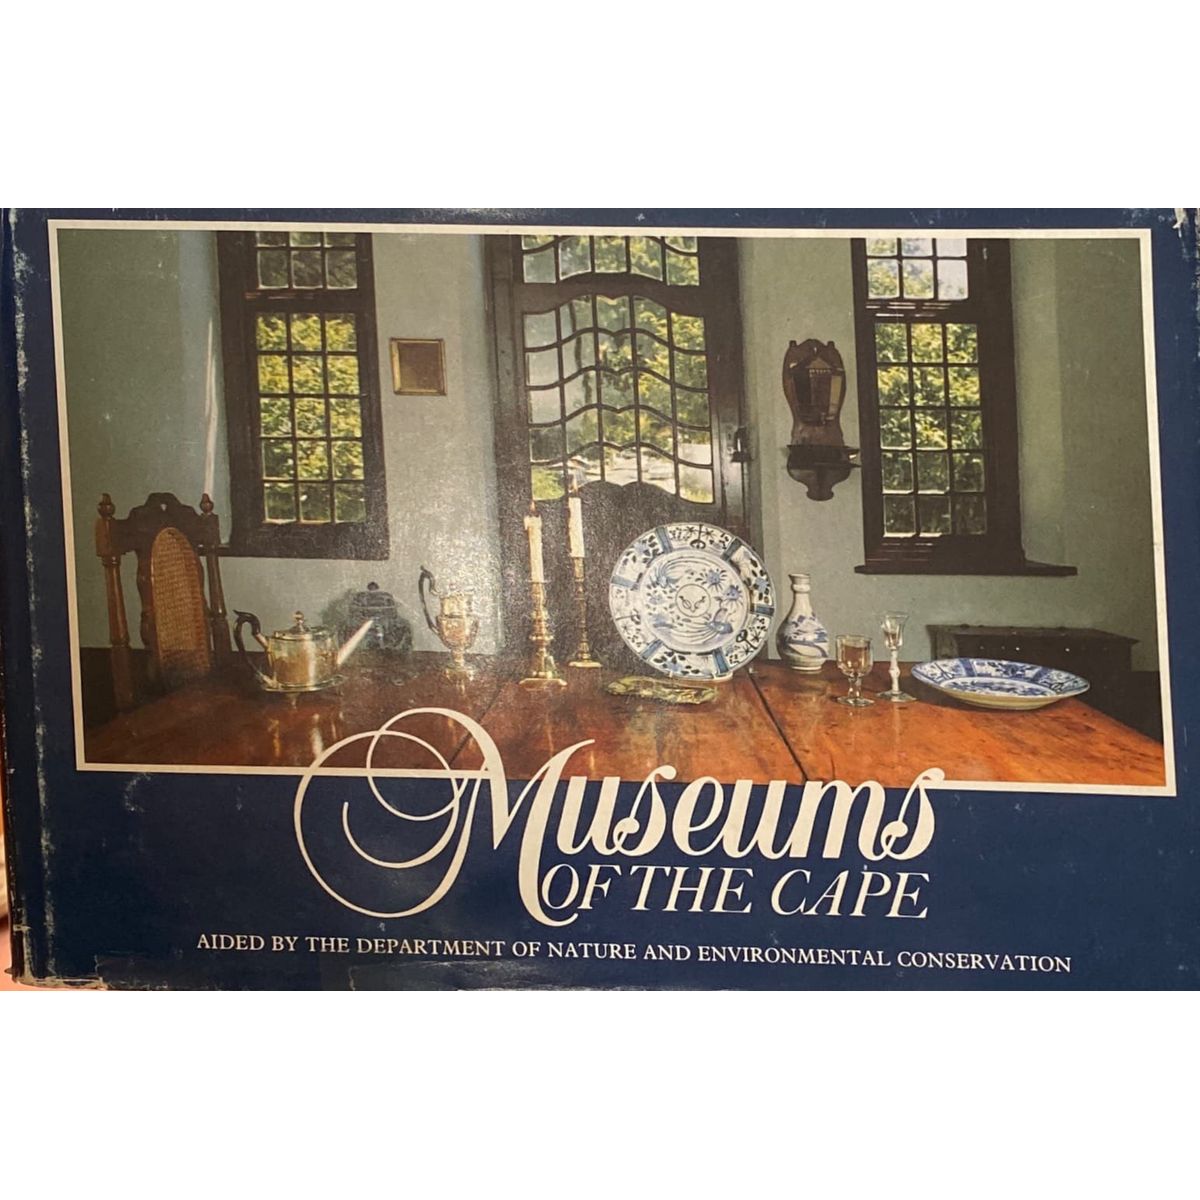 ISBN: 9780798401142 / 0798401141 - Museums of the Cape: A Guide to the Province-Aided Museums of the Cape by H.M.J. Du Preez [1982]